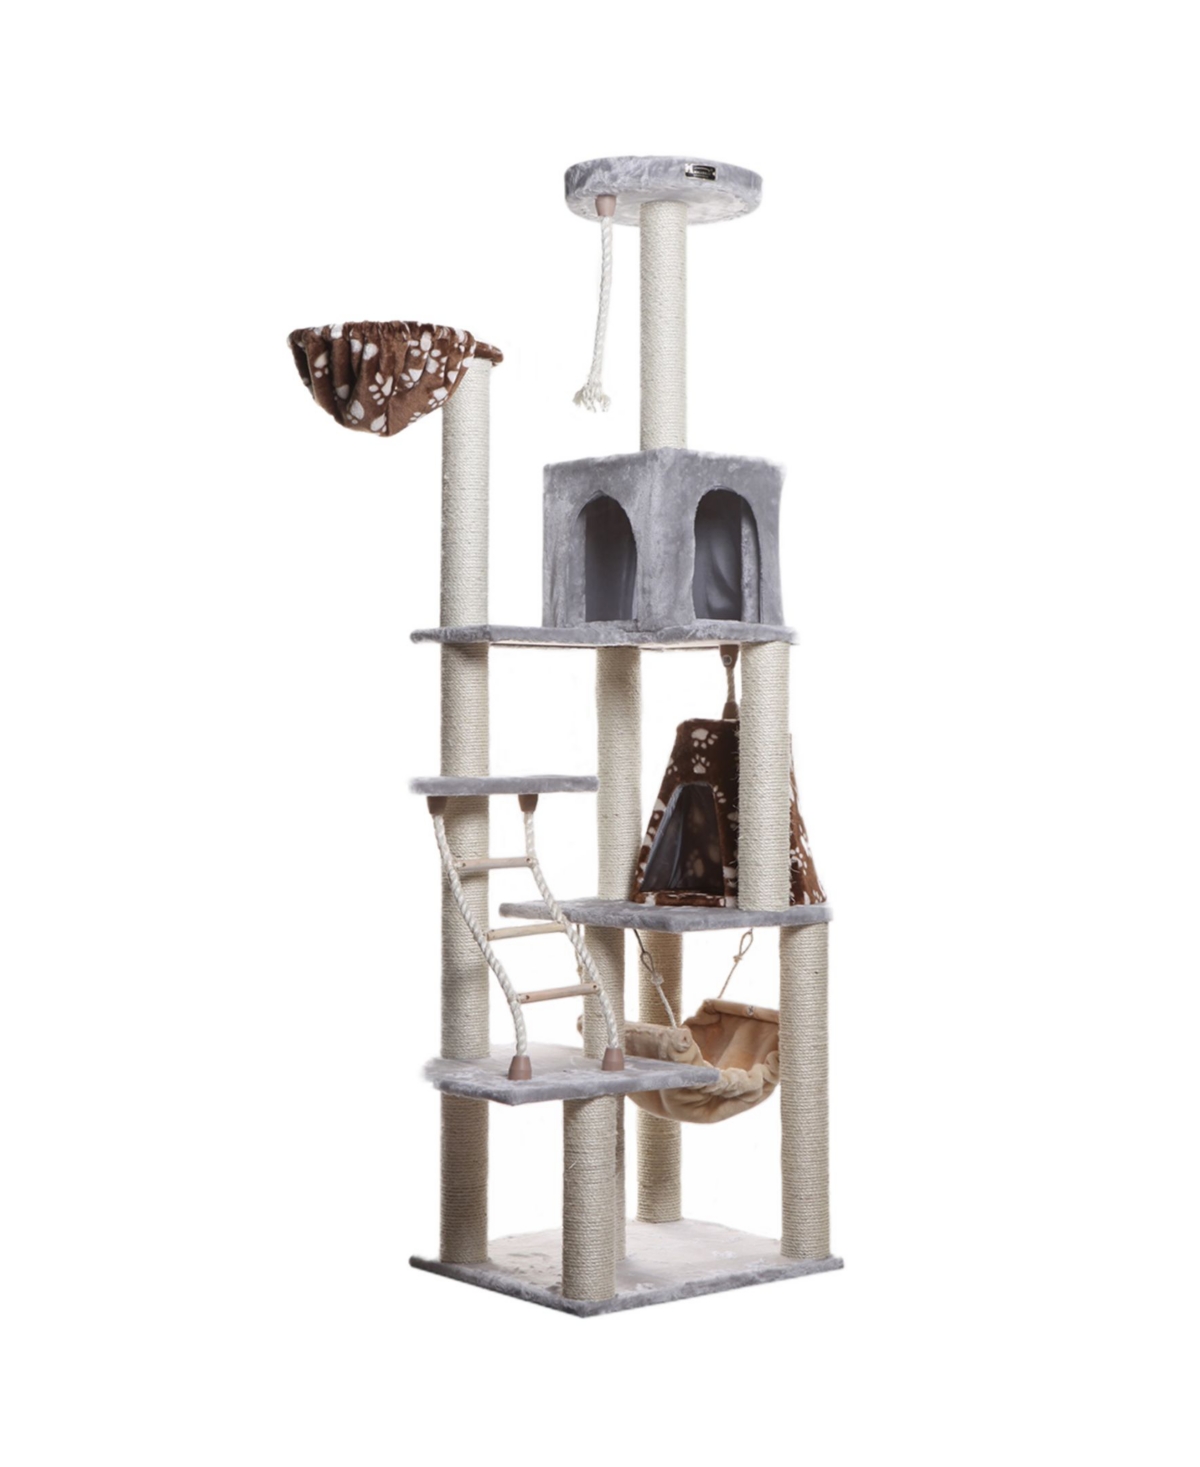 Real Wood Cat Climber Play House, Lounge Basket - Silver-Tone and Gray